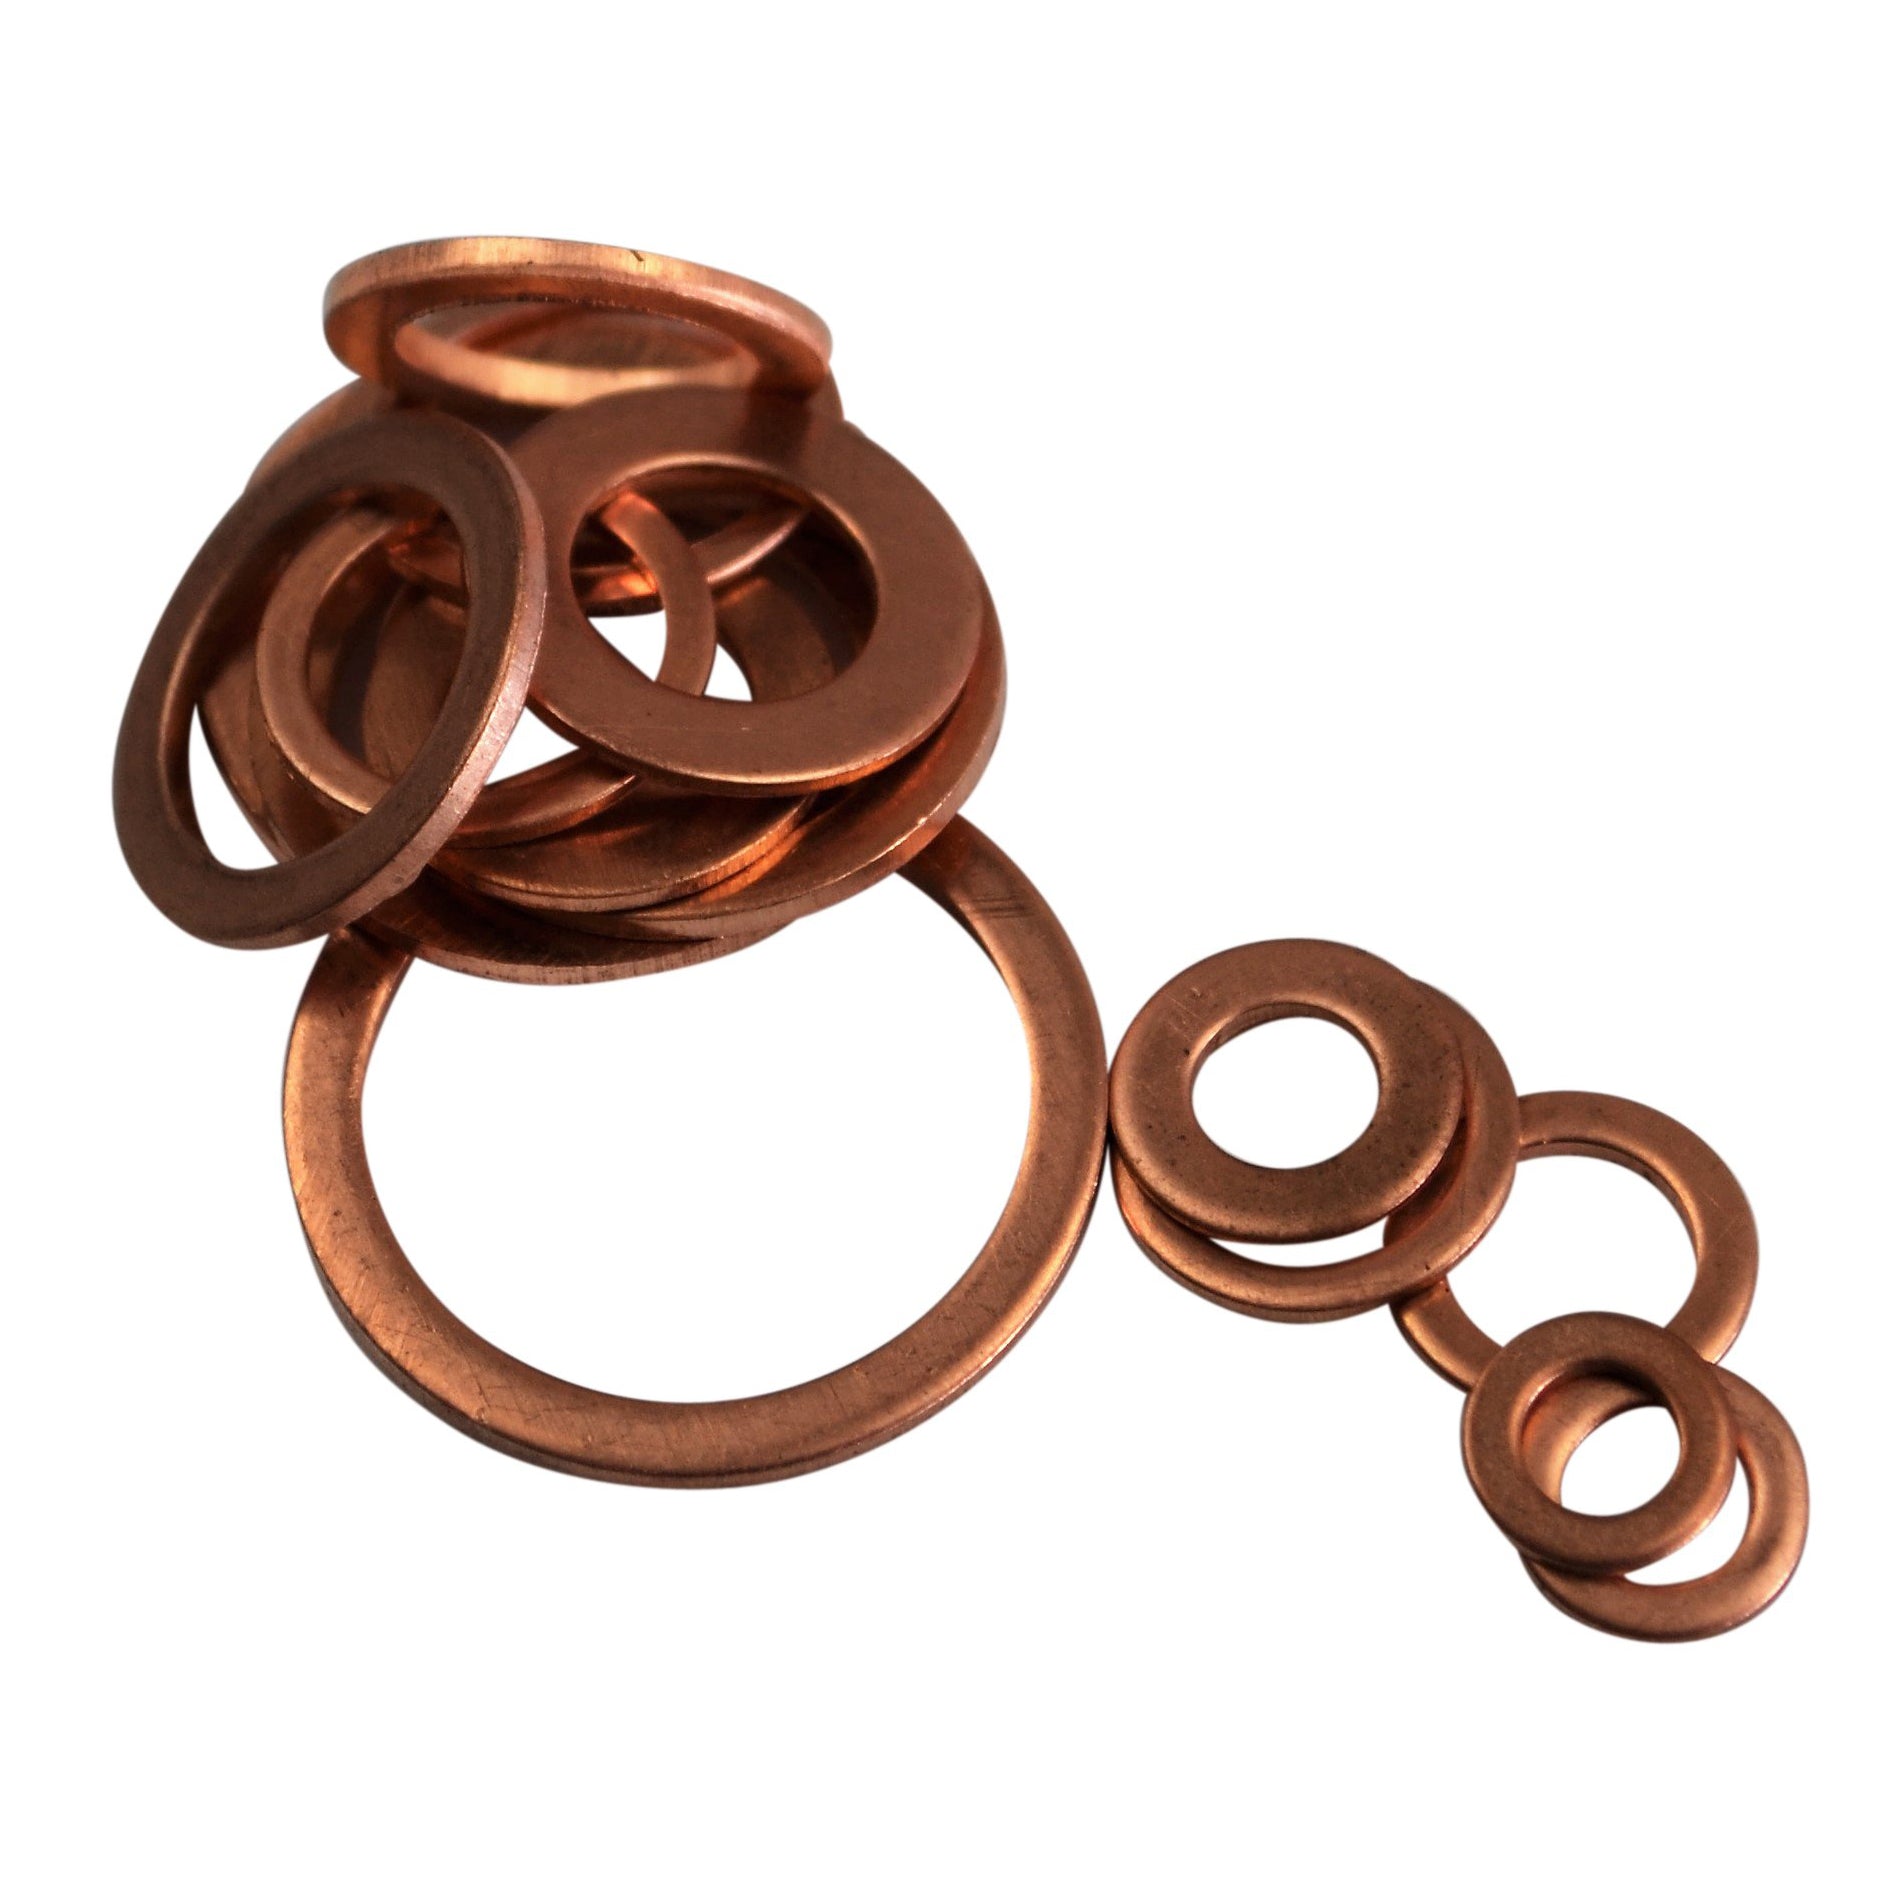 red copper washer kit grab set 150pc 15 sizes solid copper sump plug assorted fastners parts water plumbing